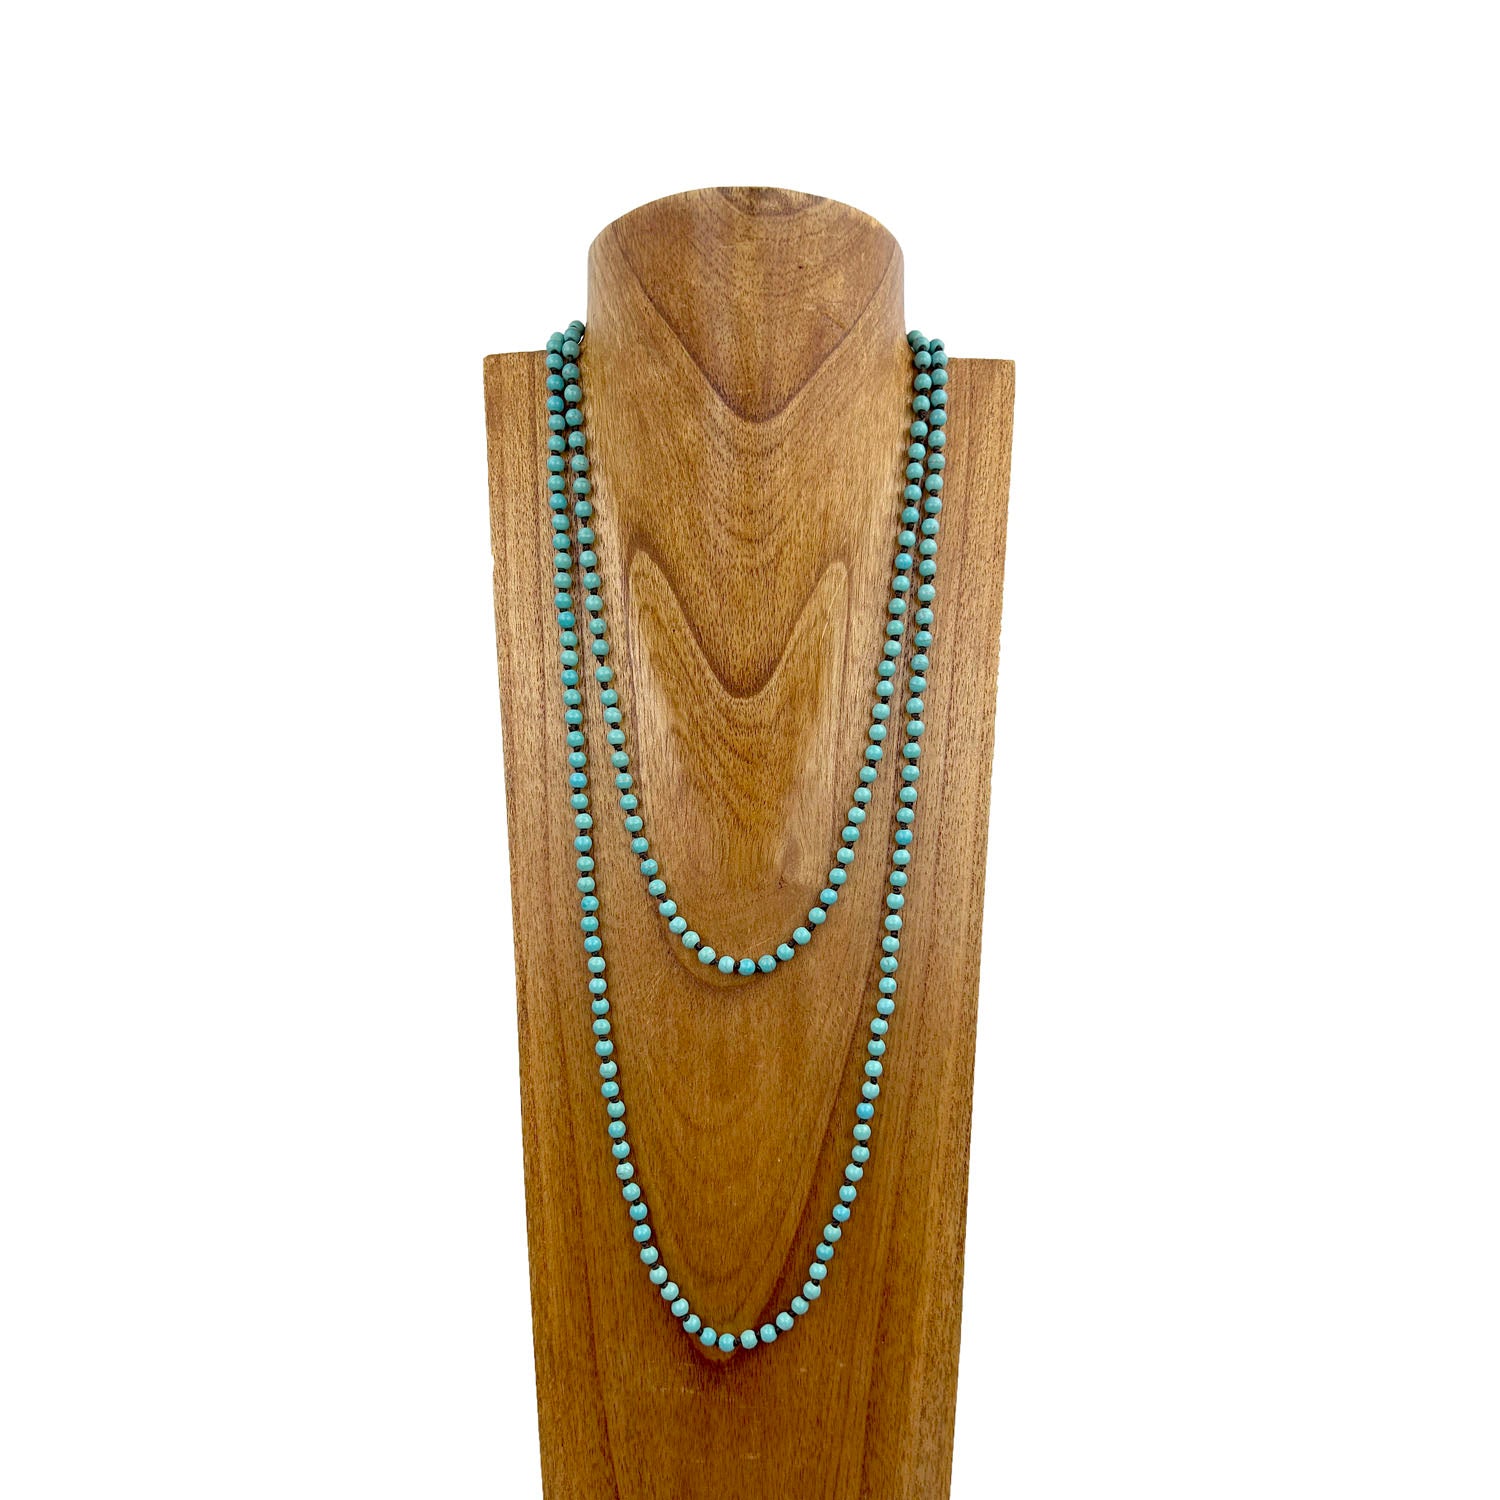 NKS230708-39	60 inches long 6mm blue turquoise stone Necklace